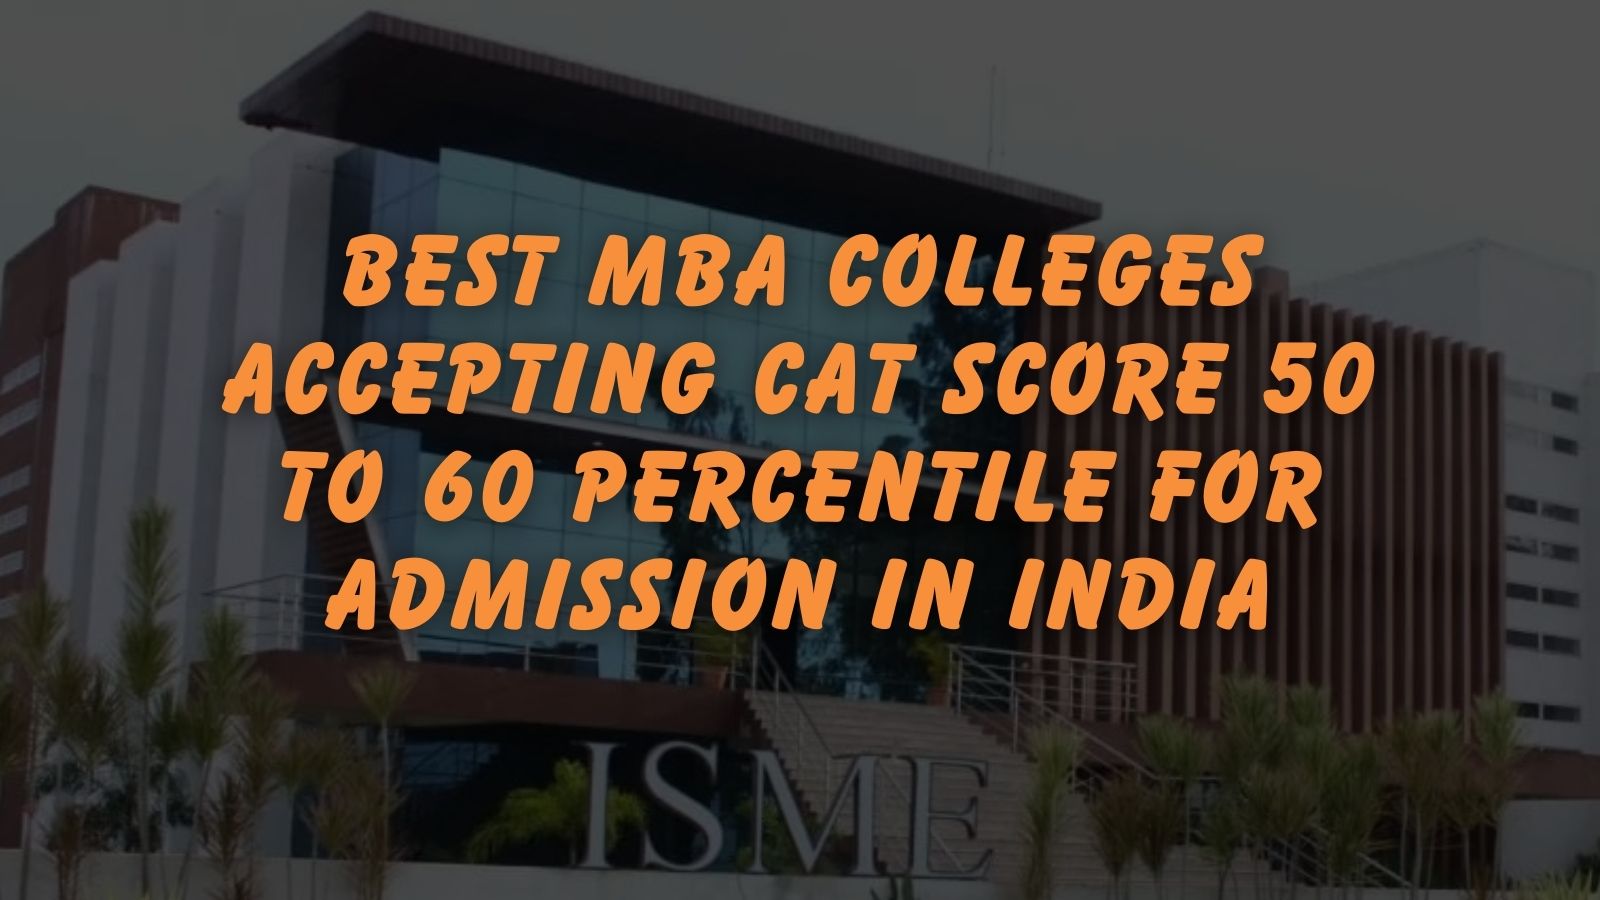 Best MBA Colleges Accepting CAT Score 50 to 60 Percentile for Admission in India